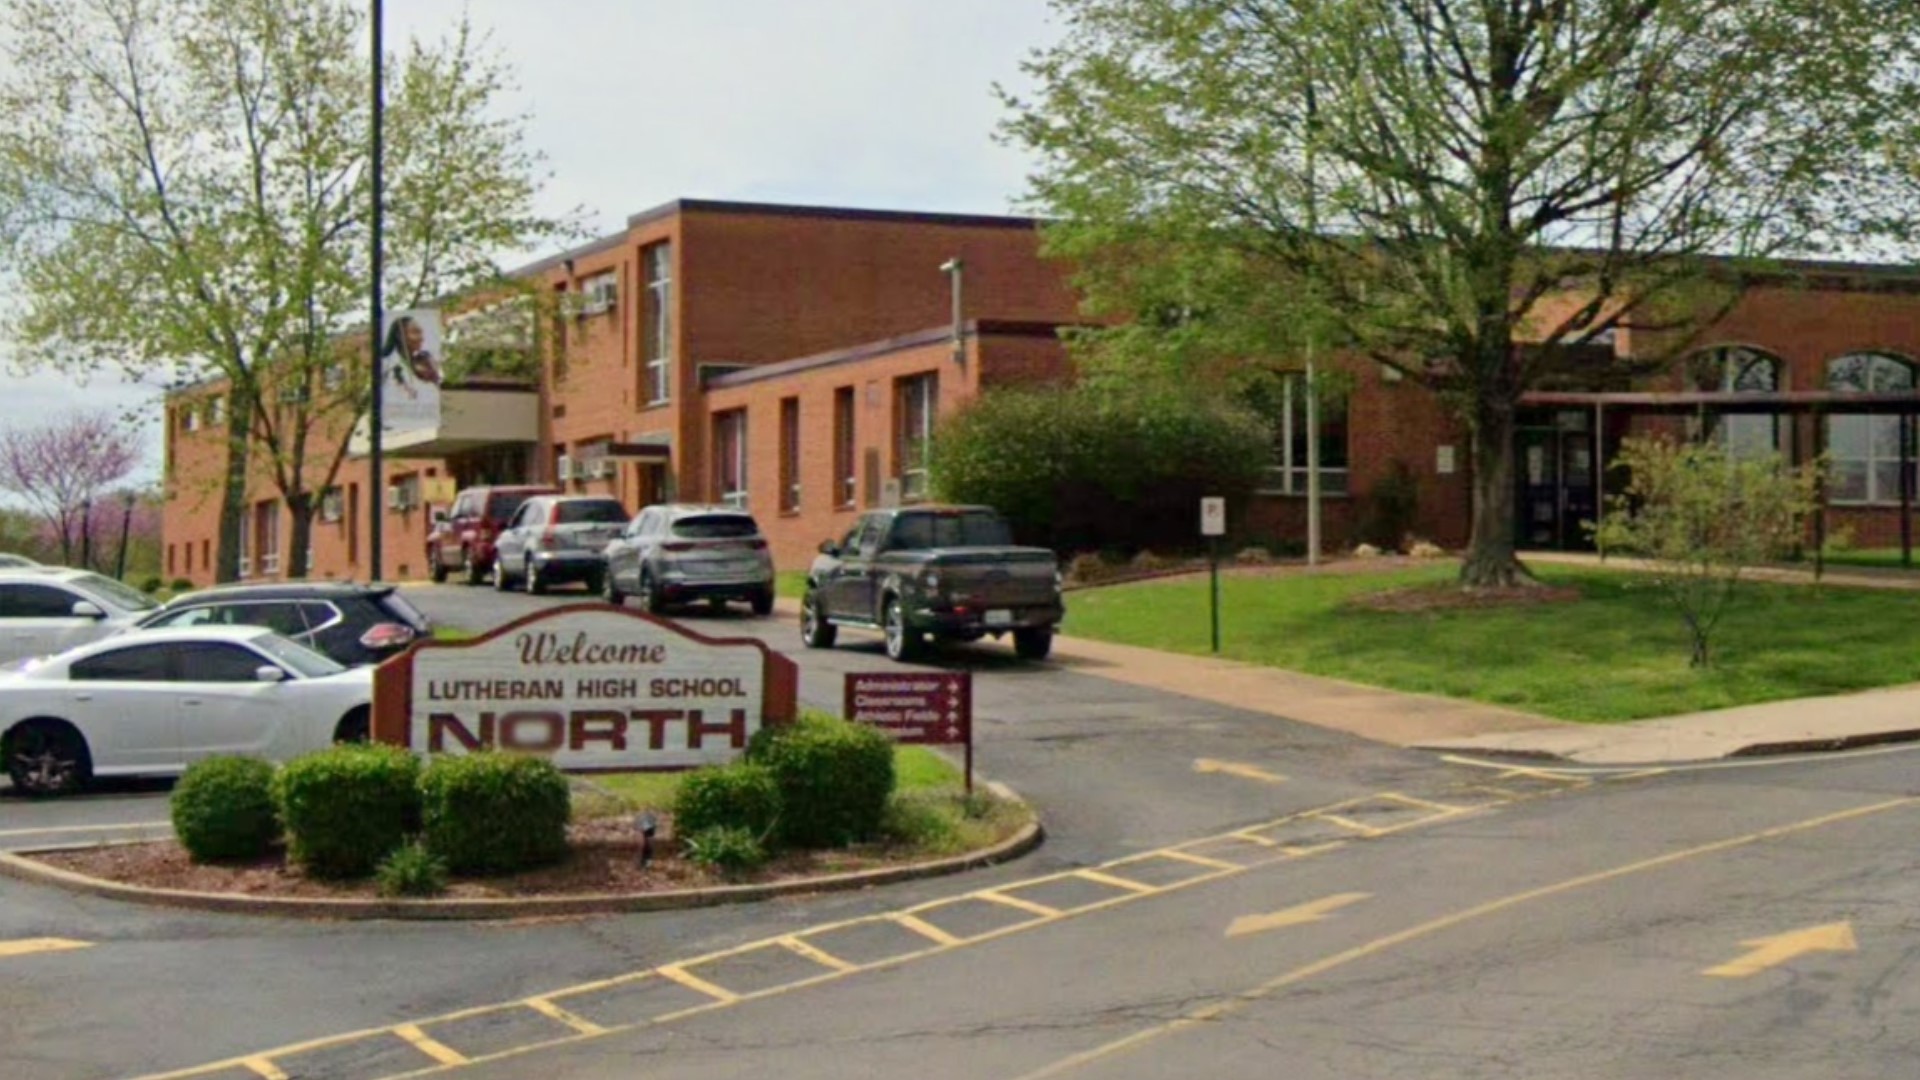 A gun was found in a student's locker Monday at Lutheran North High School, a private Christian school located at 5401 Lucas and Hunt Road.